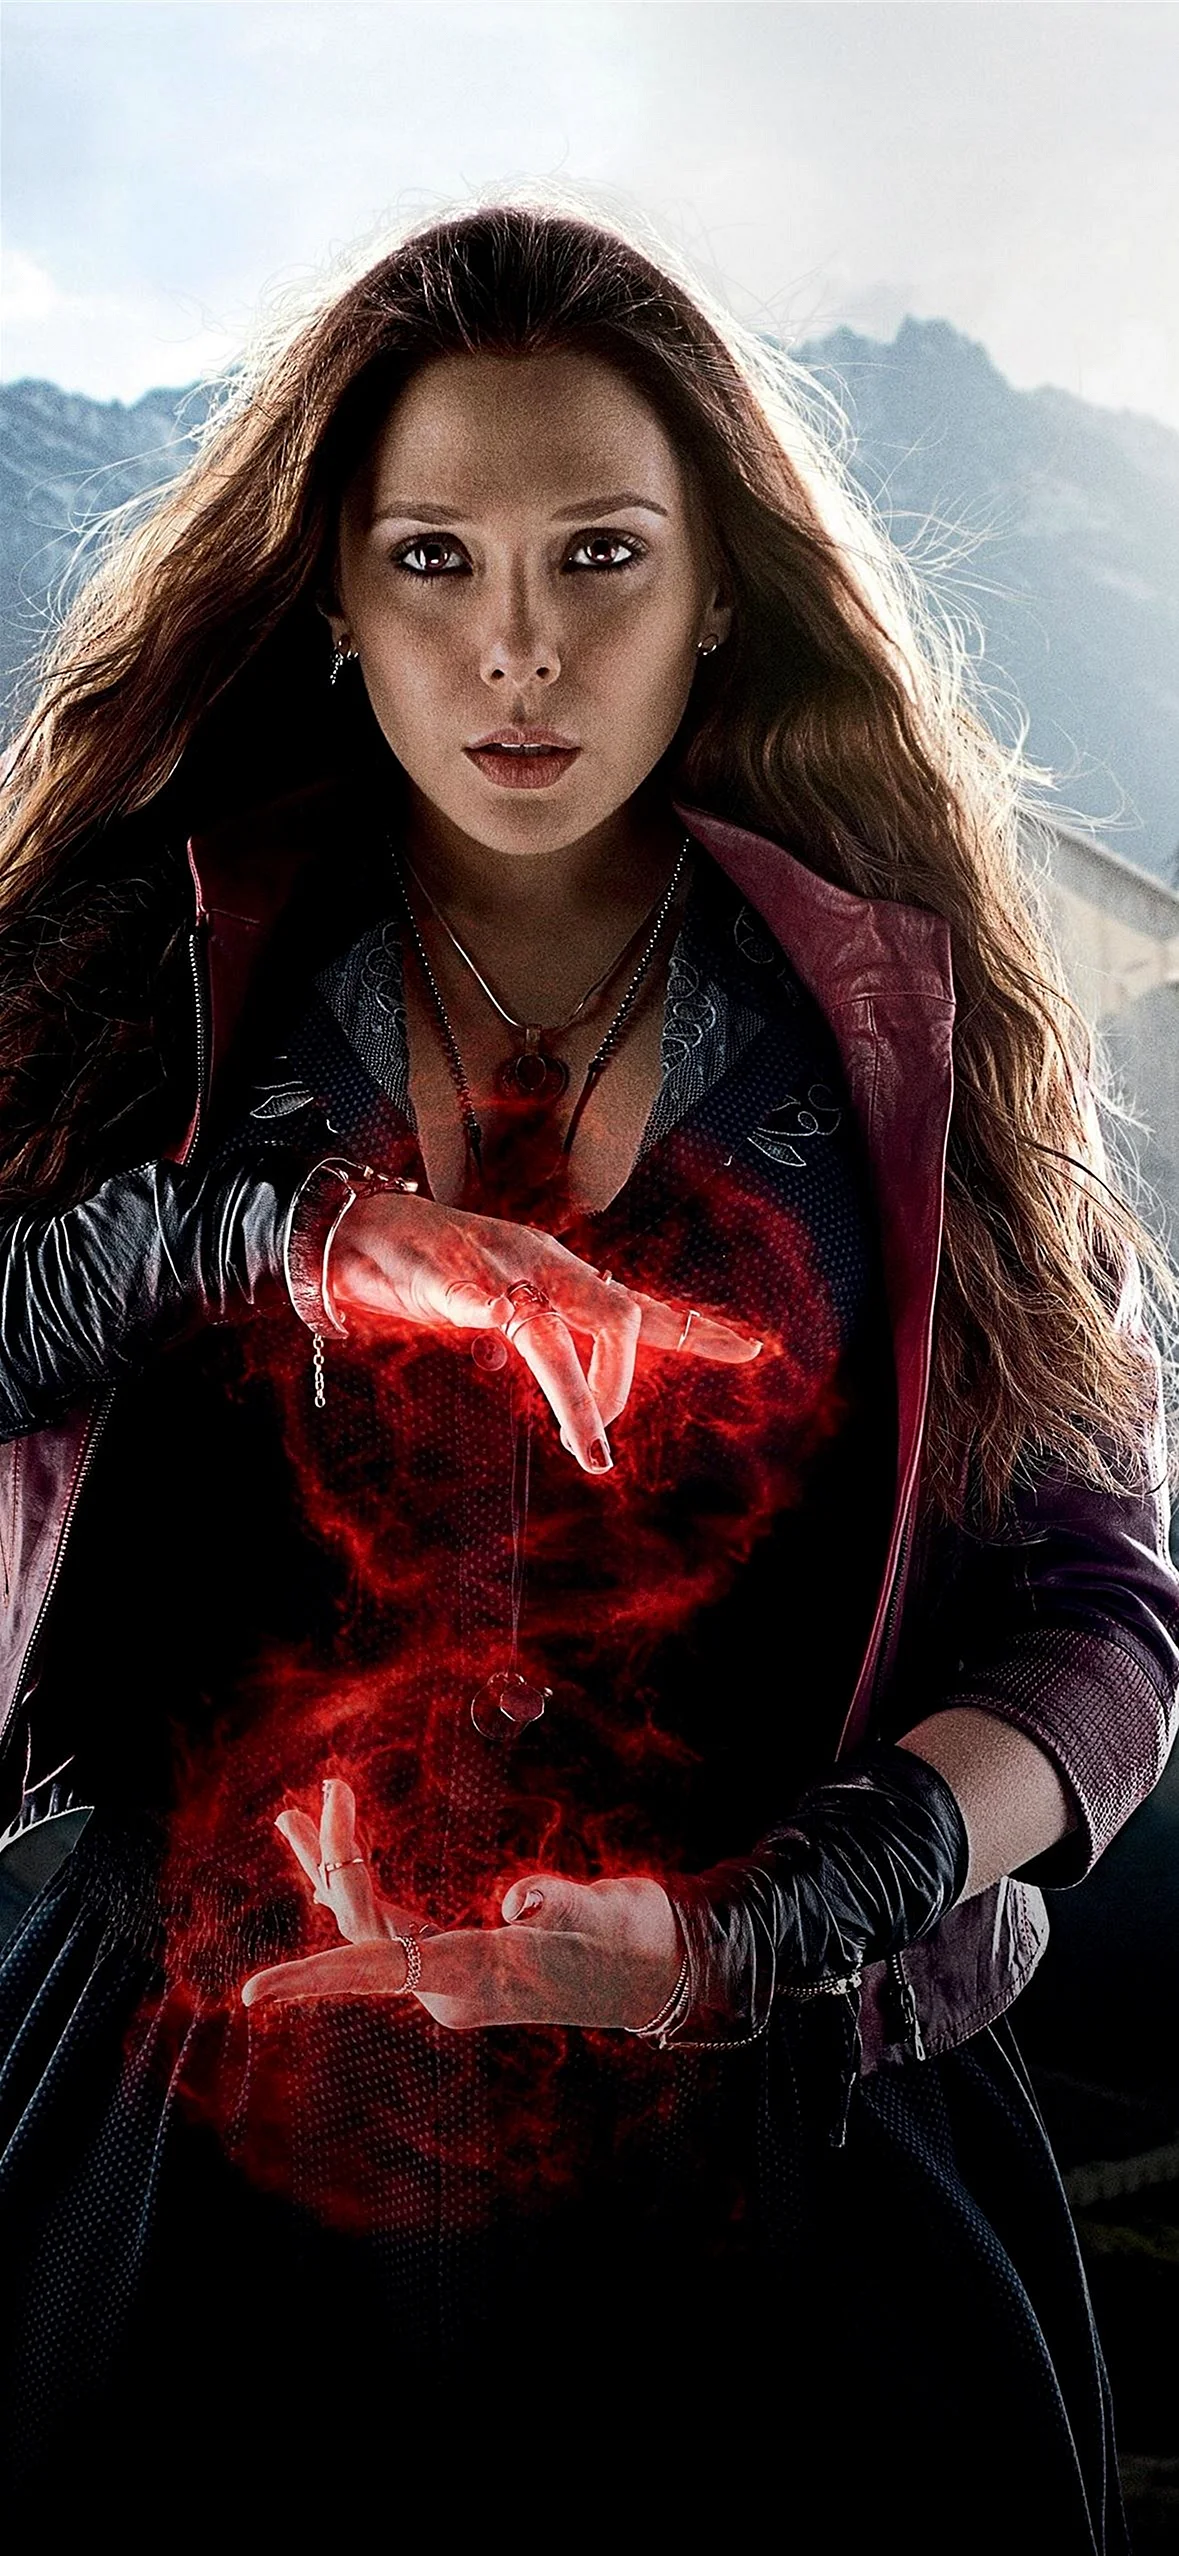 Wanda Maximoff Scarlet Witch Wallpaper for iPhone 14 Pro